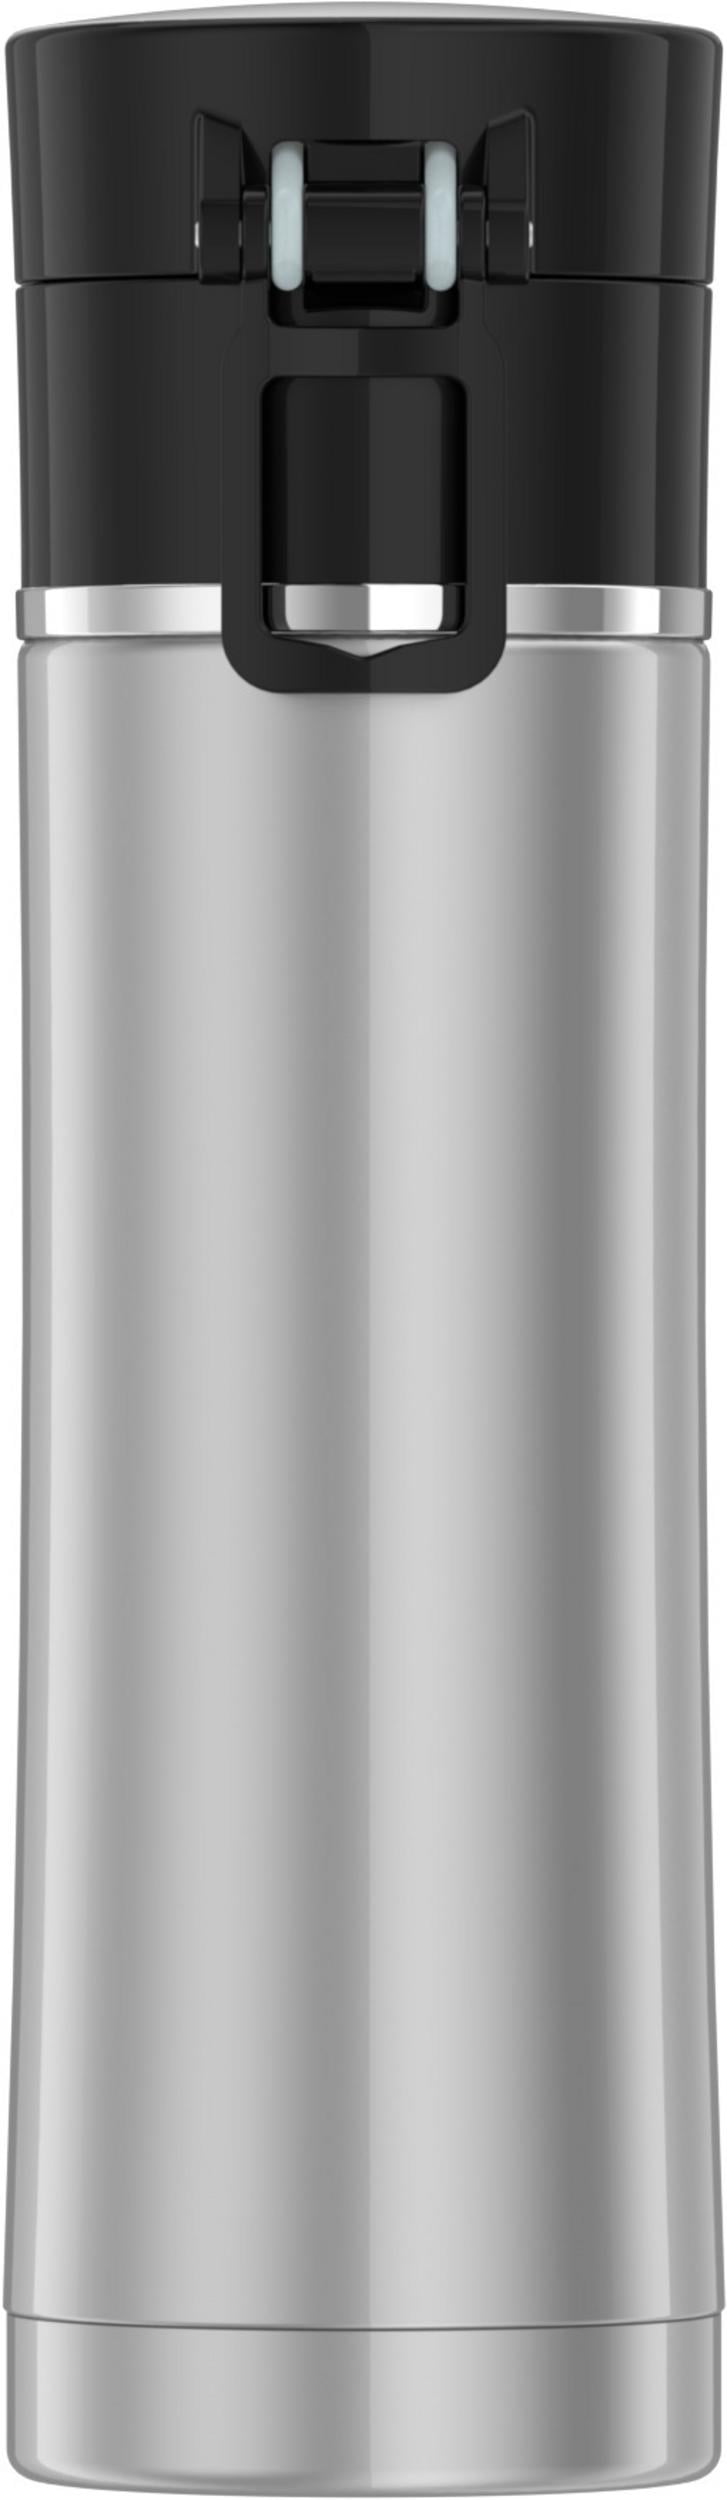 Thermos Sipp Vacuum Insulated Drink Bottle With Lid 16 Oz